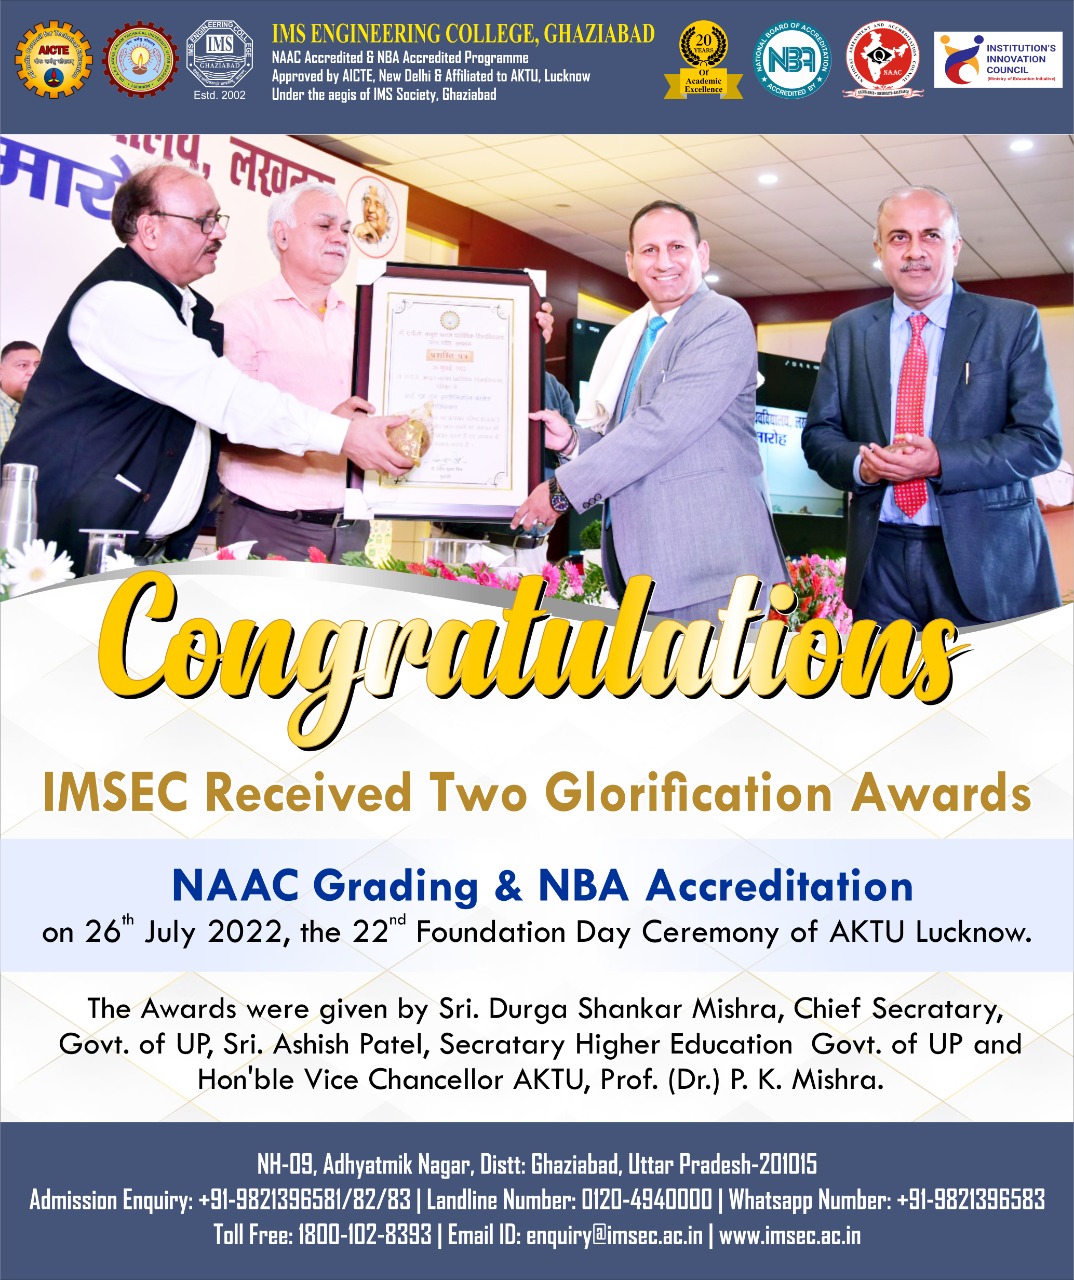 Two “Glorification Awards”, one for NAAC Grading and the other for NBA Accreditation